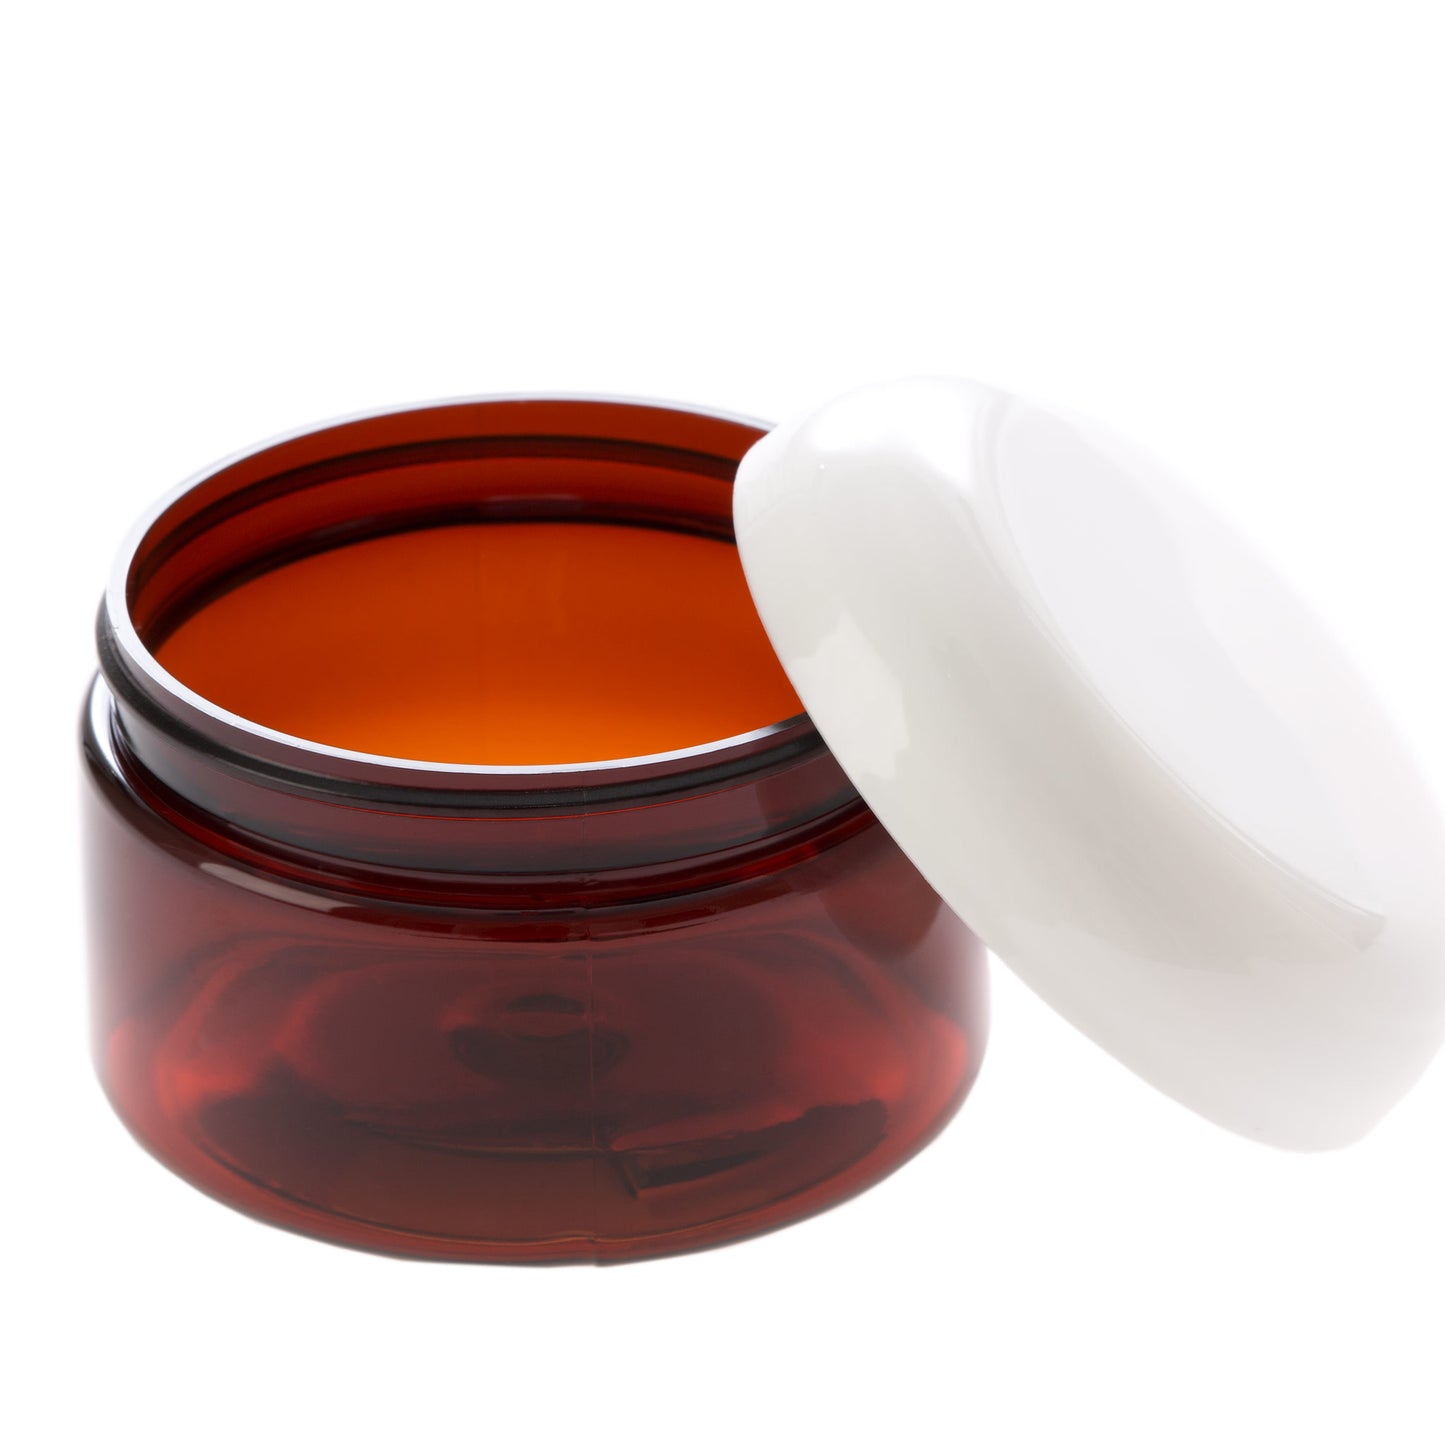 4 oz Amber Shallow Jar with White Dome Cap